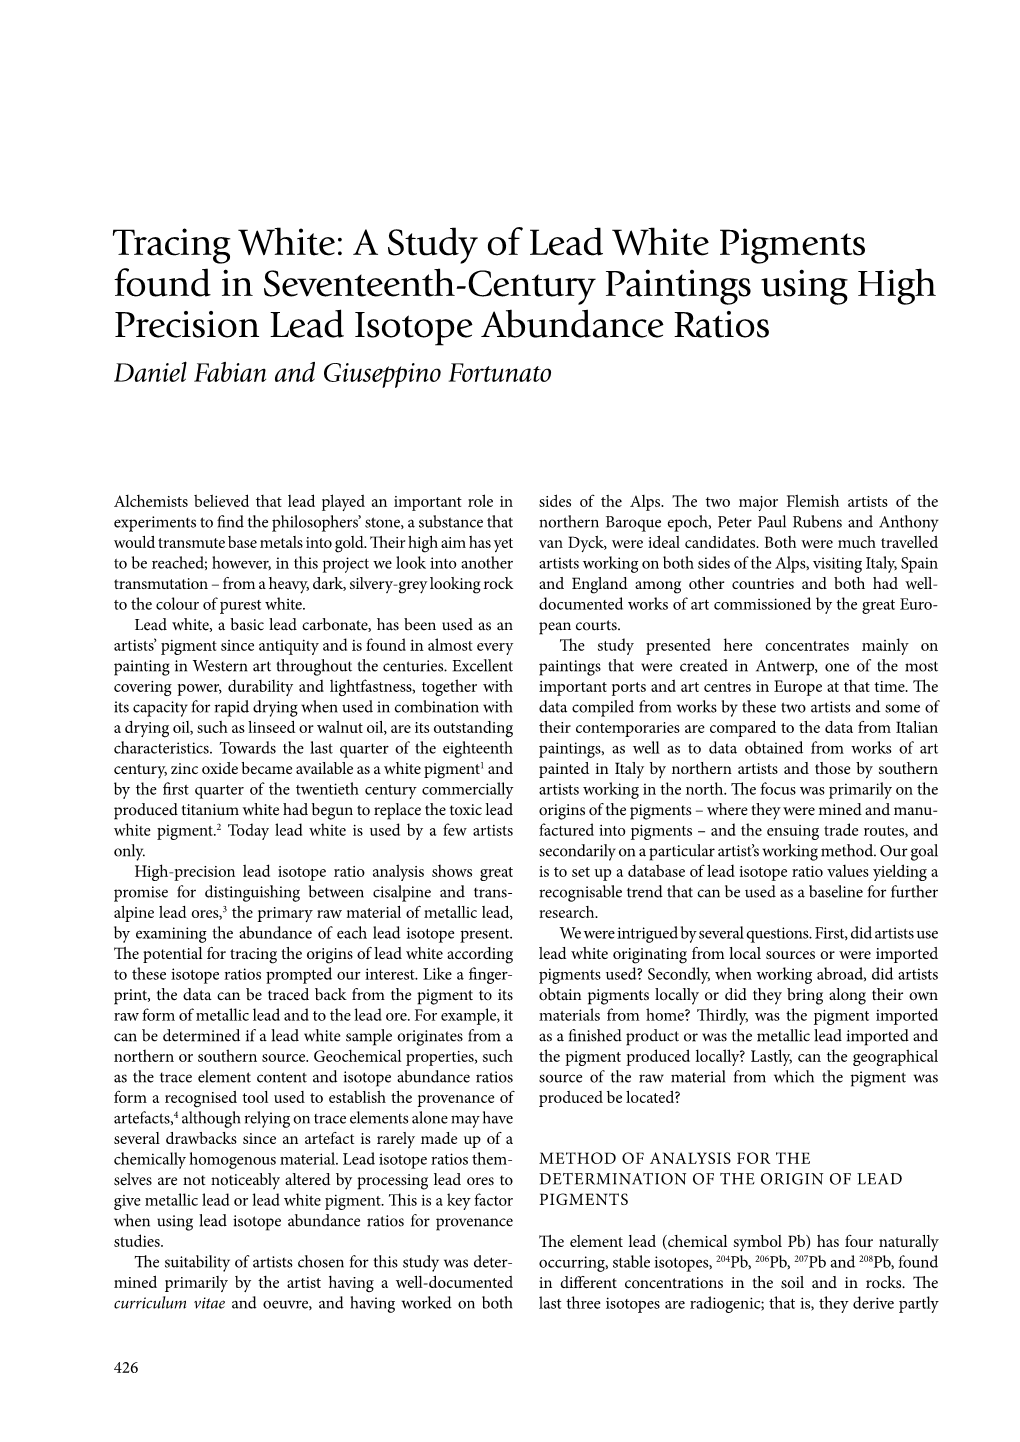 Tracing White: a Study of Lead White Pigments Found in Seventeenth-Century Paintings Using High Precision Lead Isotope Abundance